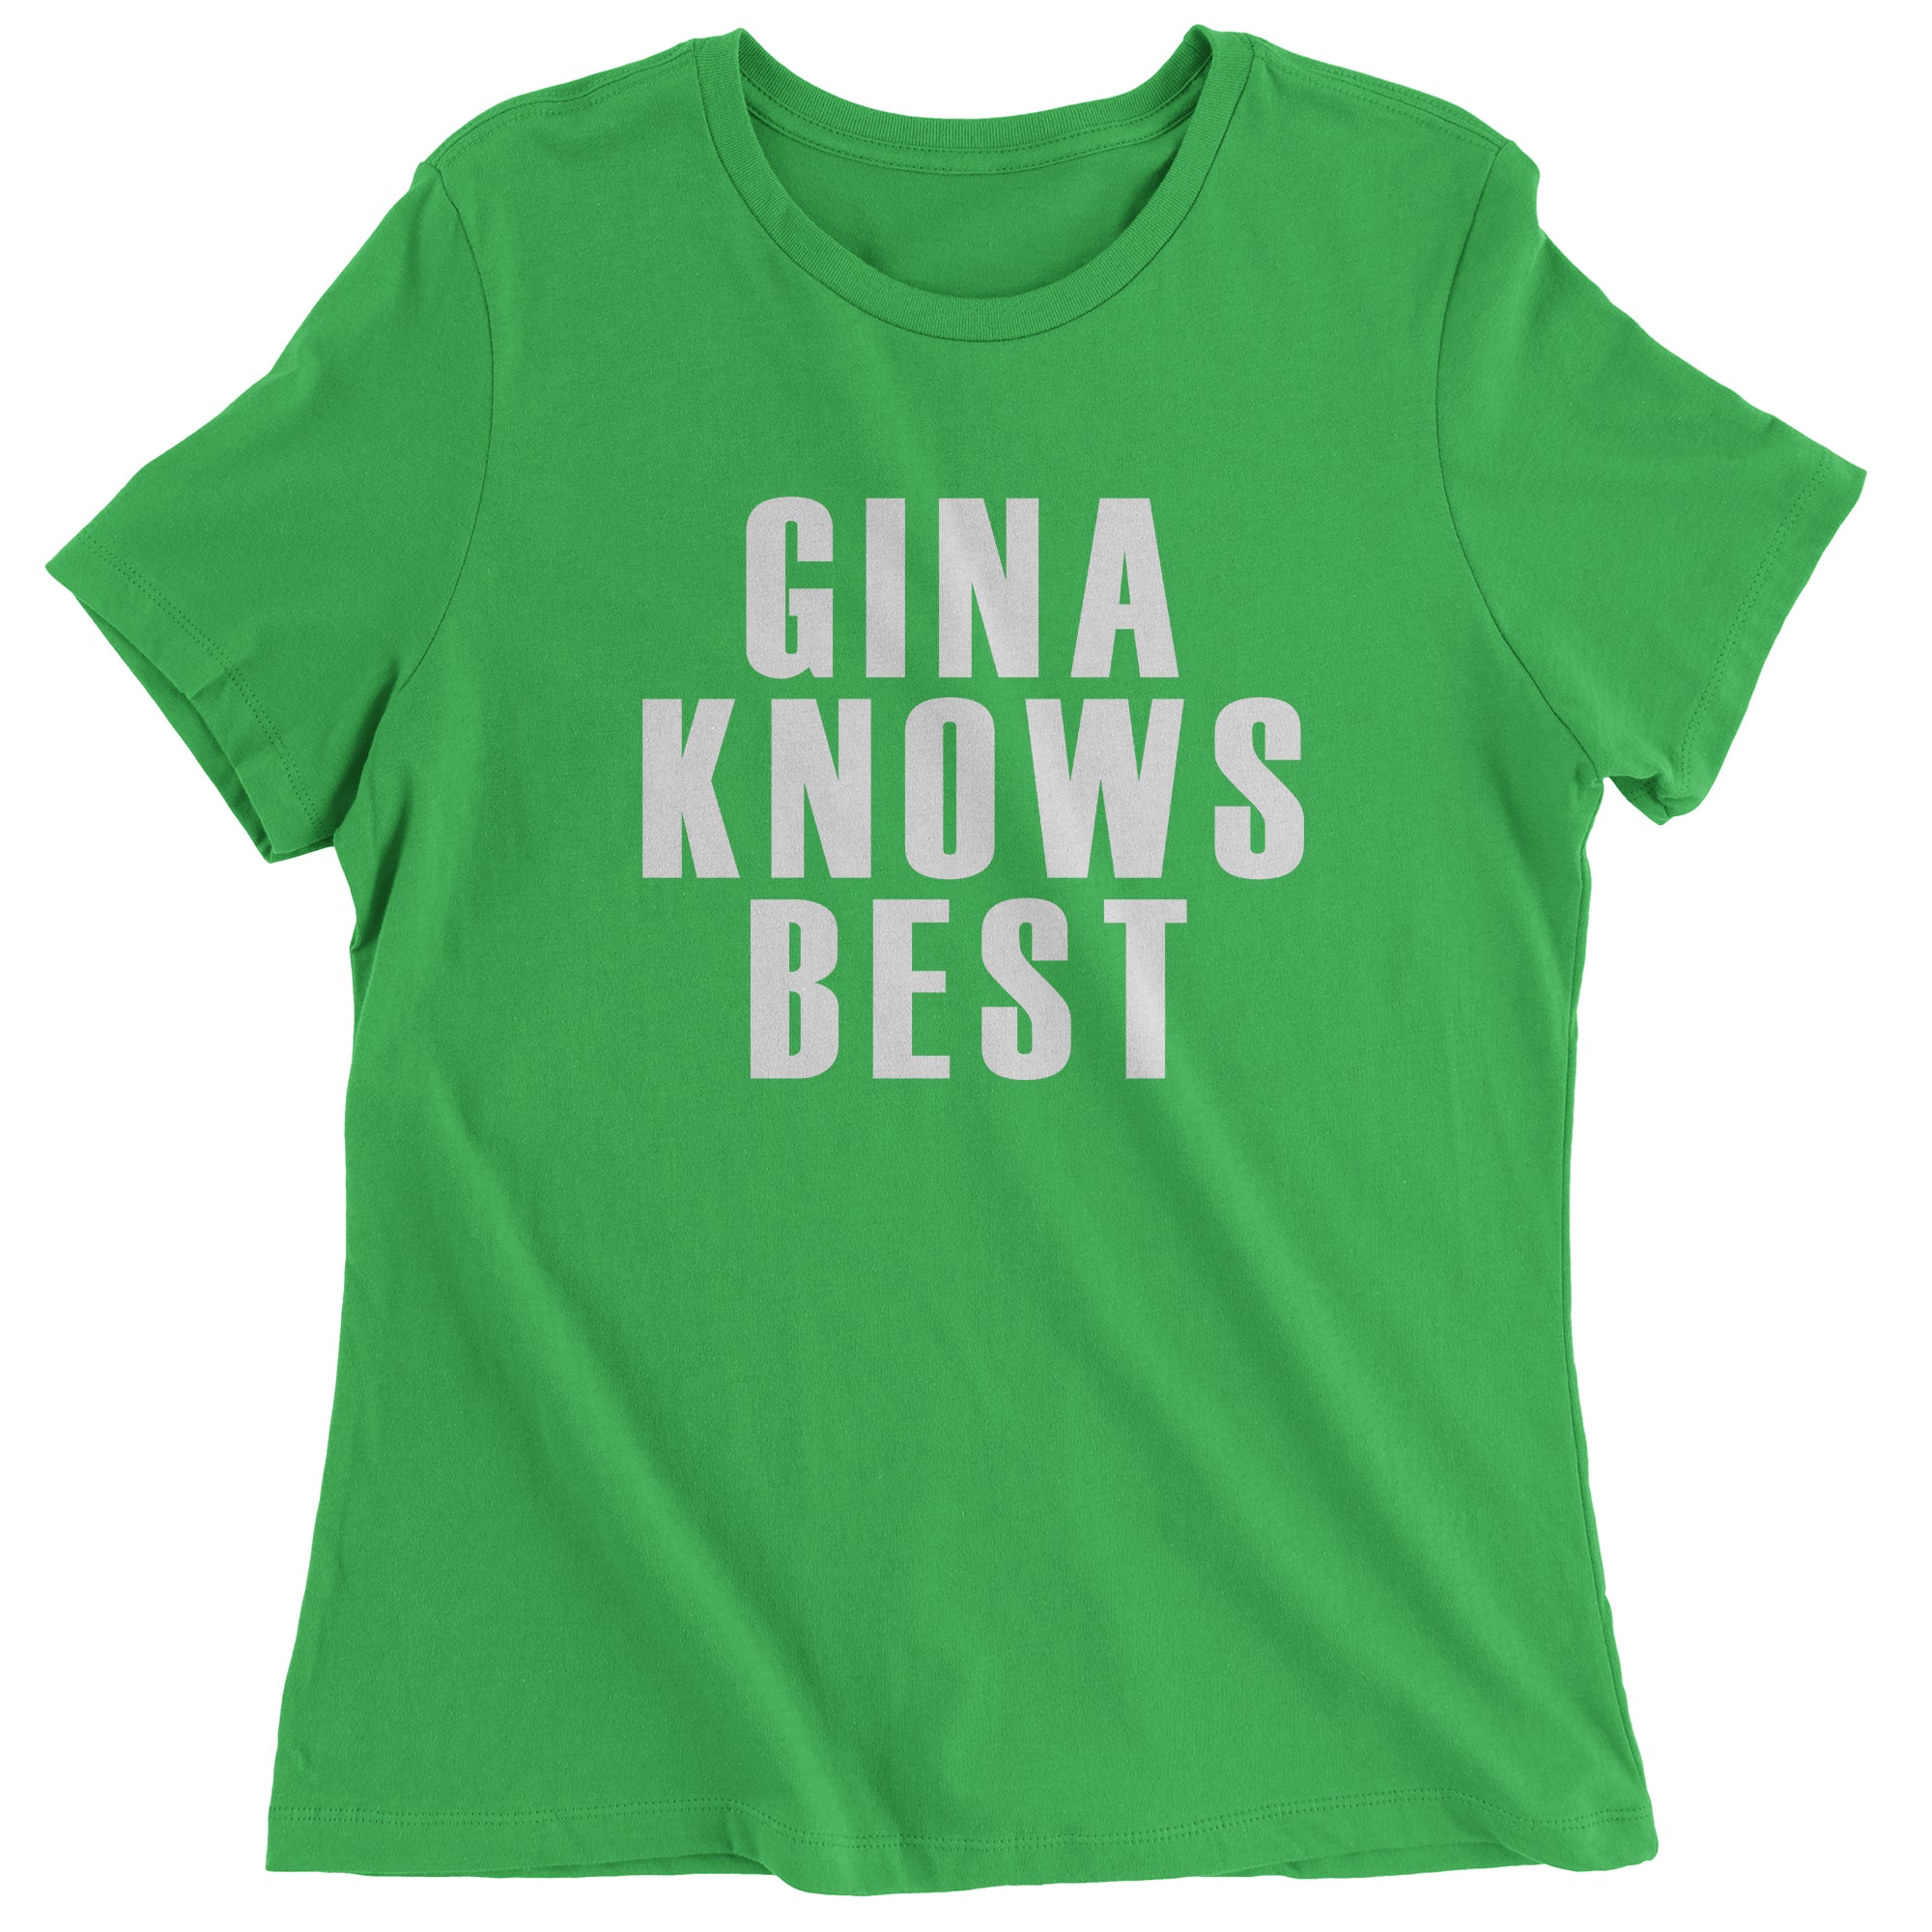 Gina Knows Best Brooklyn 99 Funny Women's T-Shirt